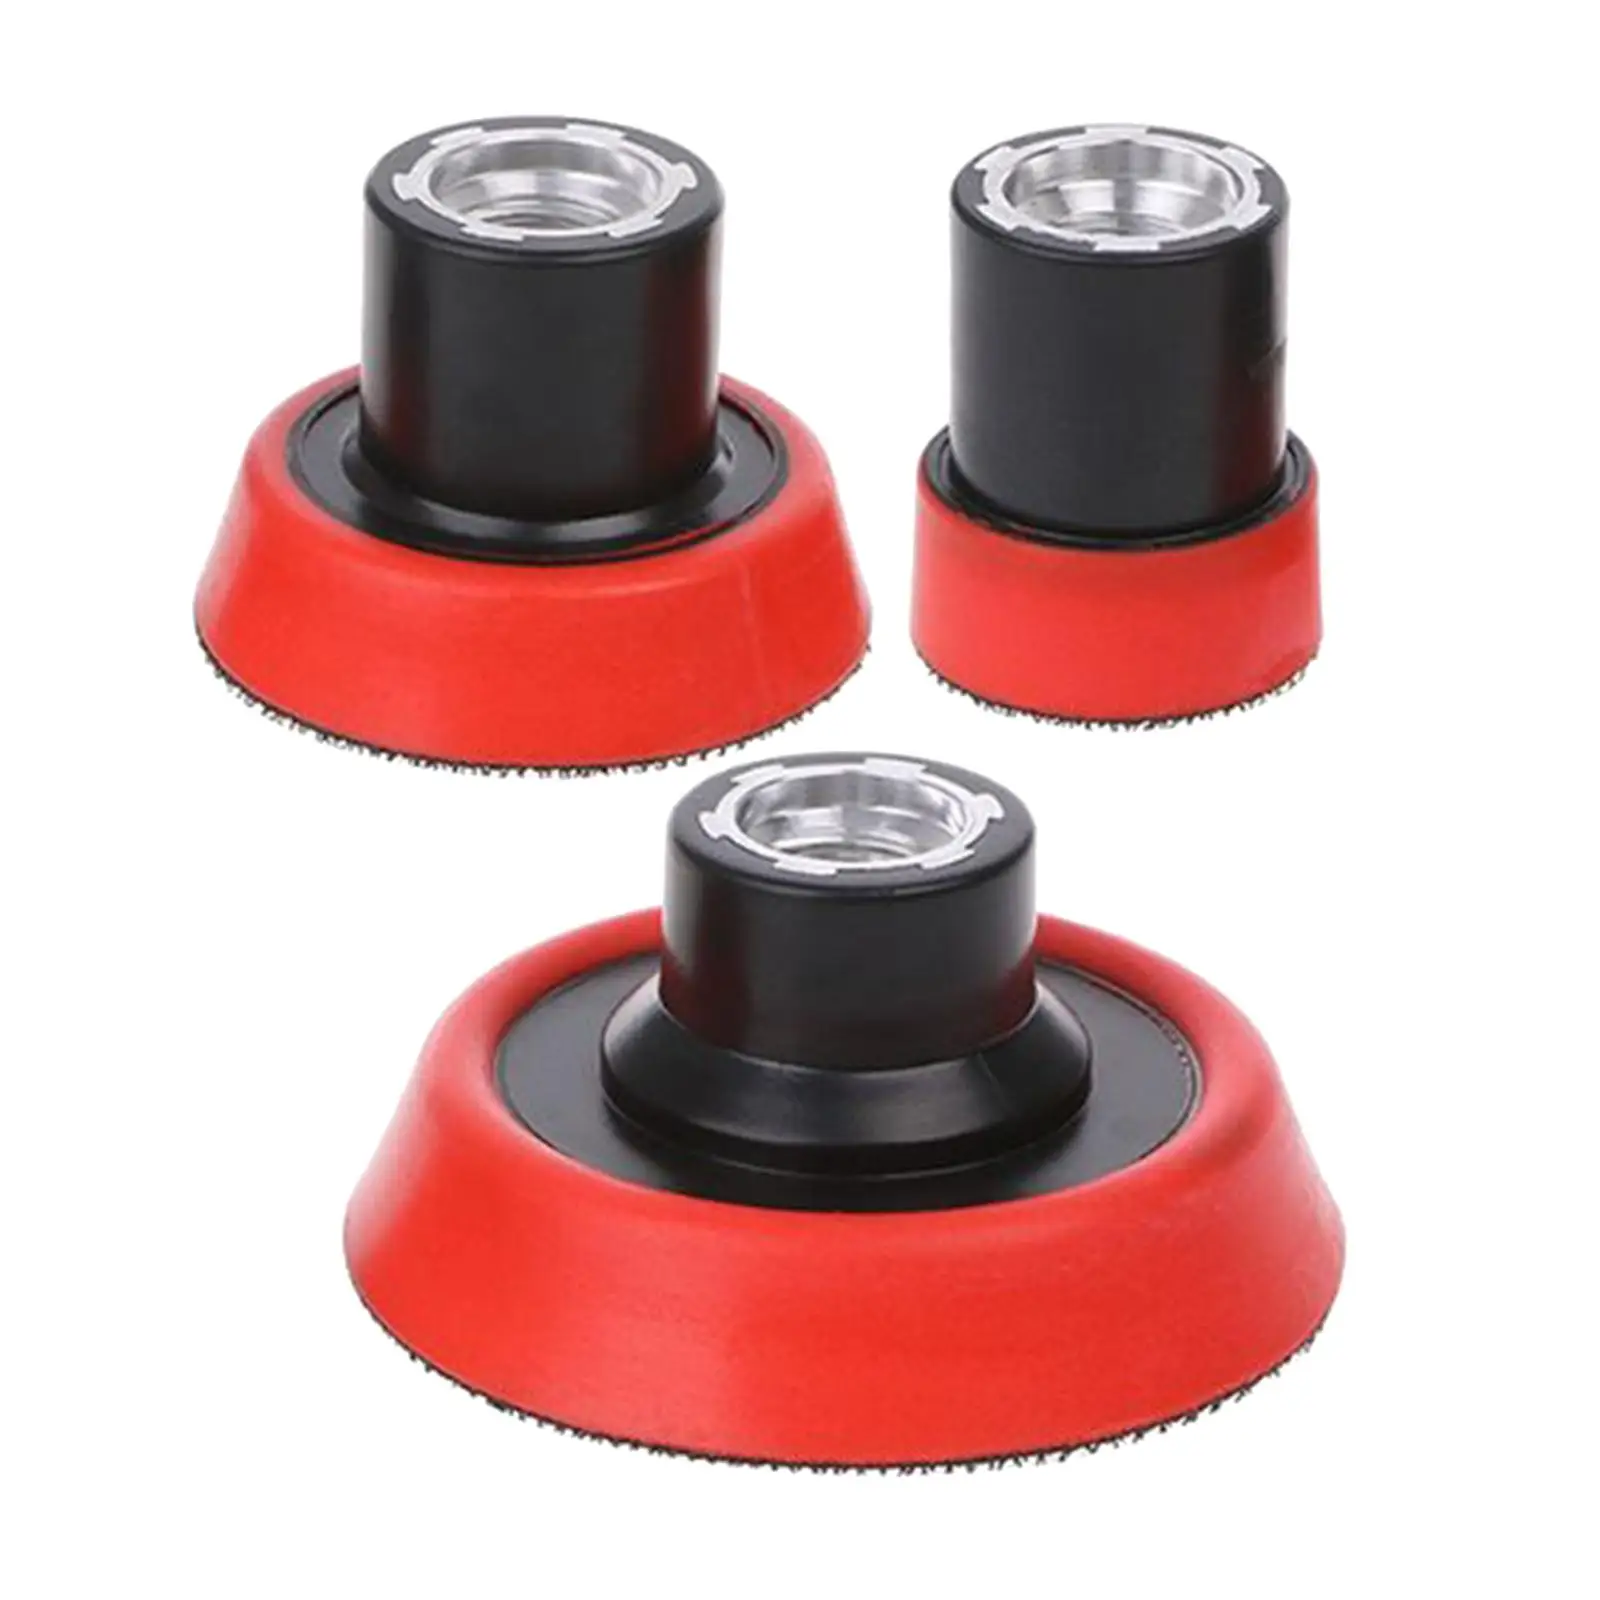 3 Pieces M14 Accessories Set Backing Plate Polisher for Car Wash Polishing